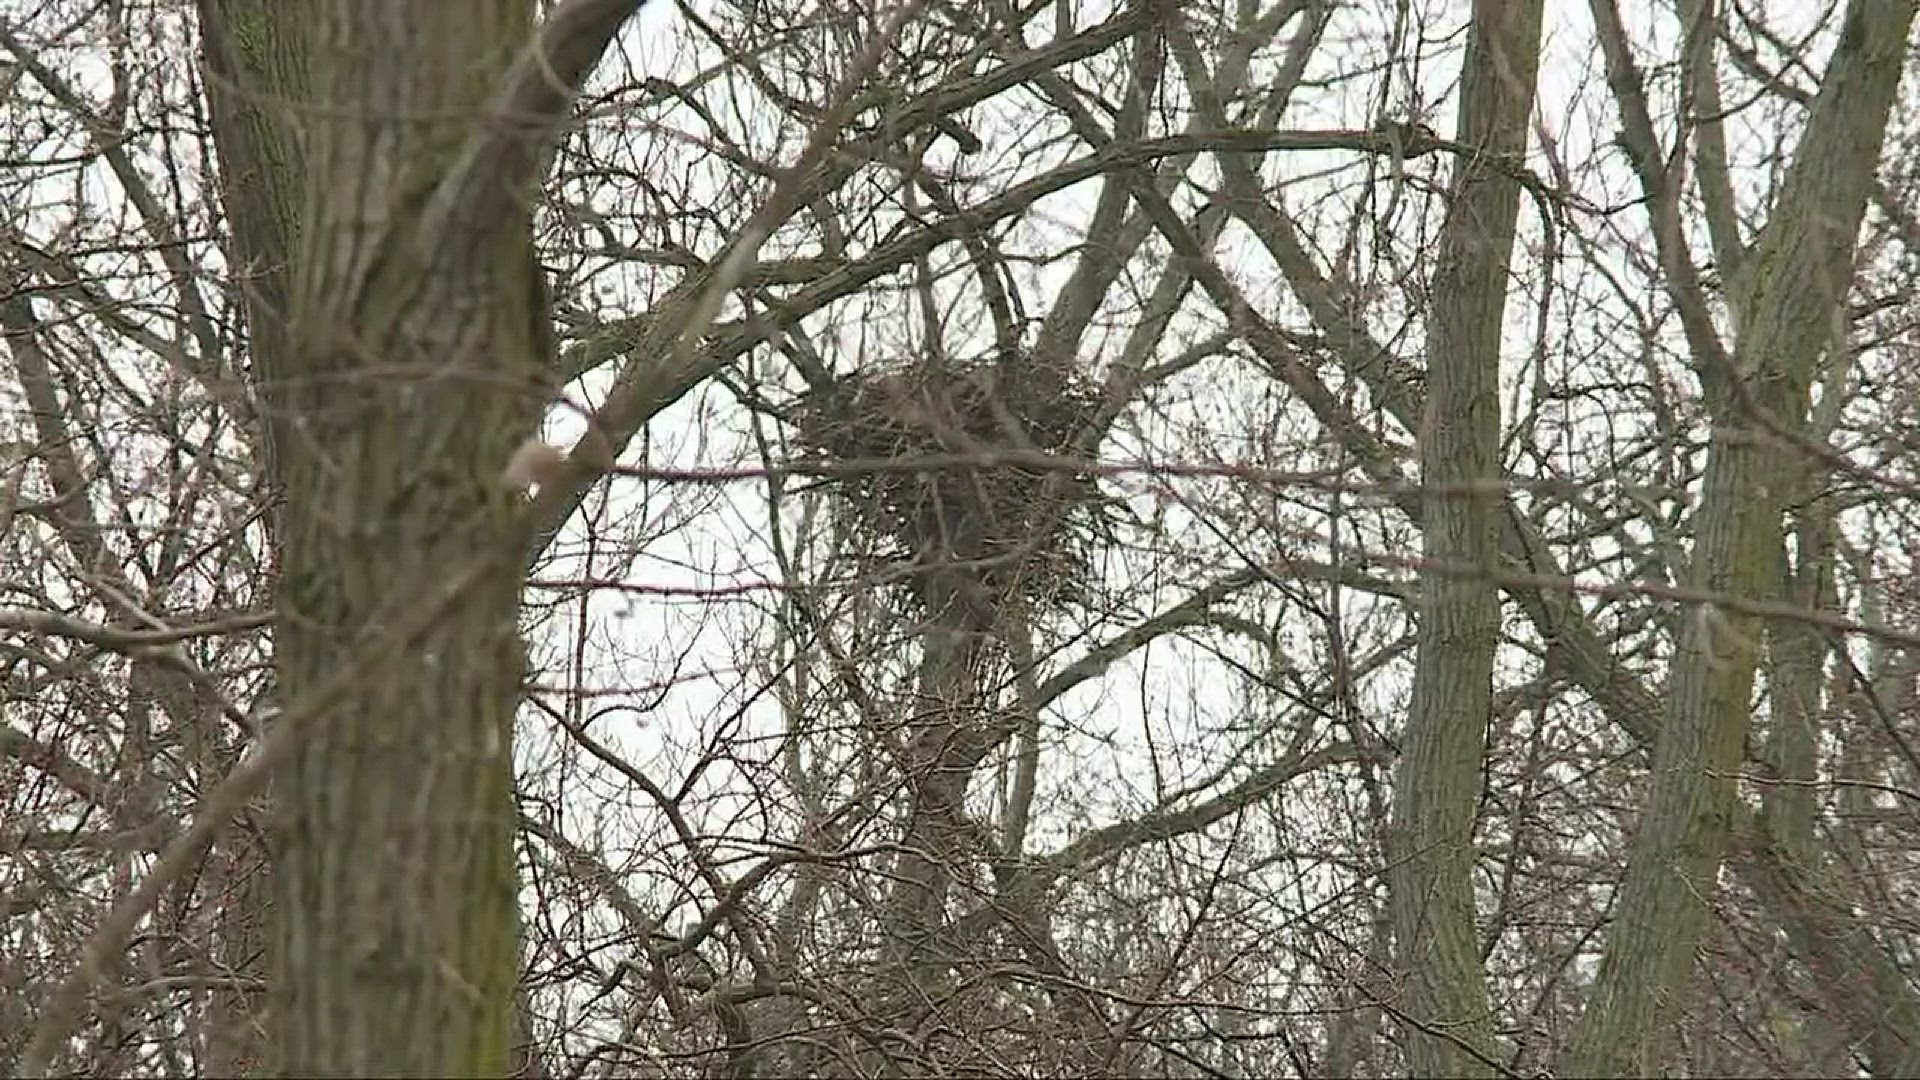 Bald eagle nest spotted in Cuyahoga River valley